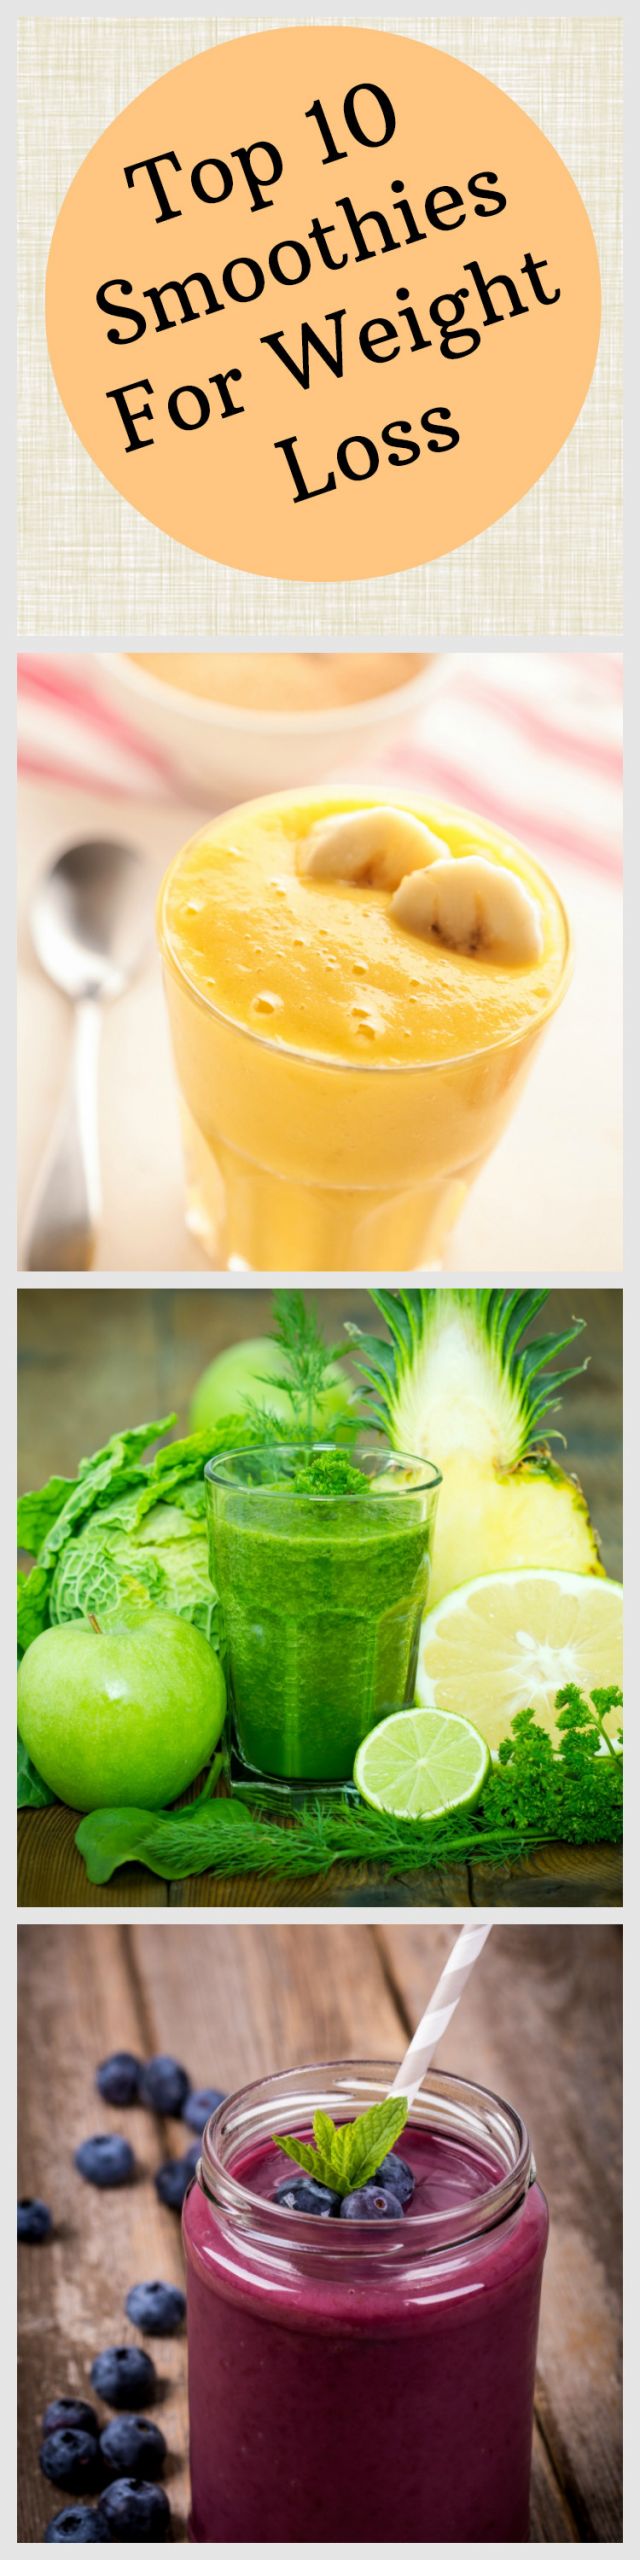 Nutribullet Recipes For Weight Loss
 10 Awesome Smoothies for Weight Loss All Nutribullet Recipes